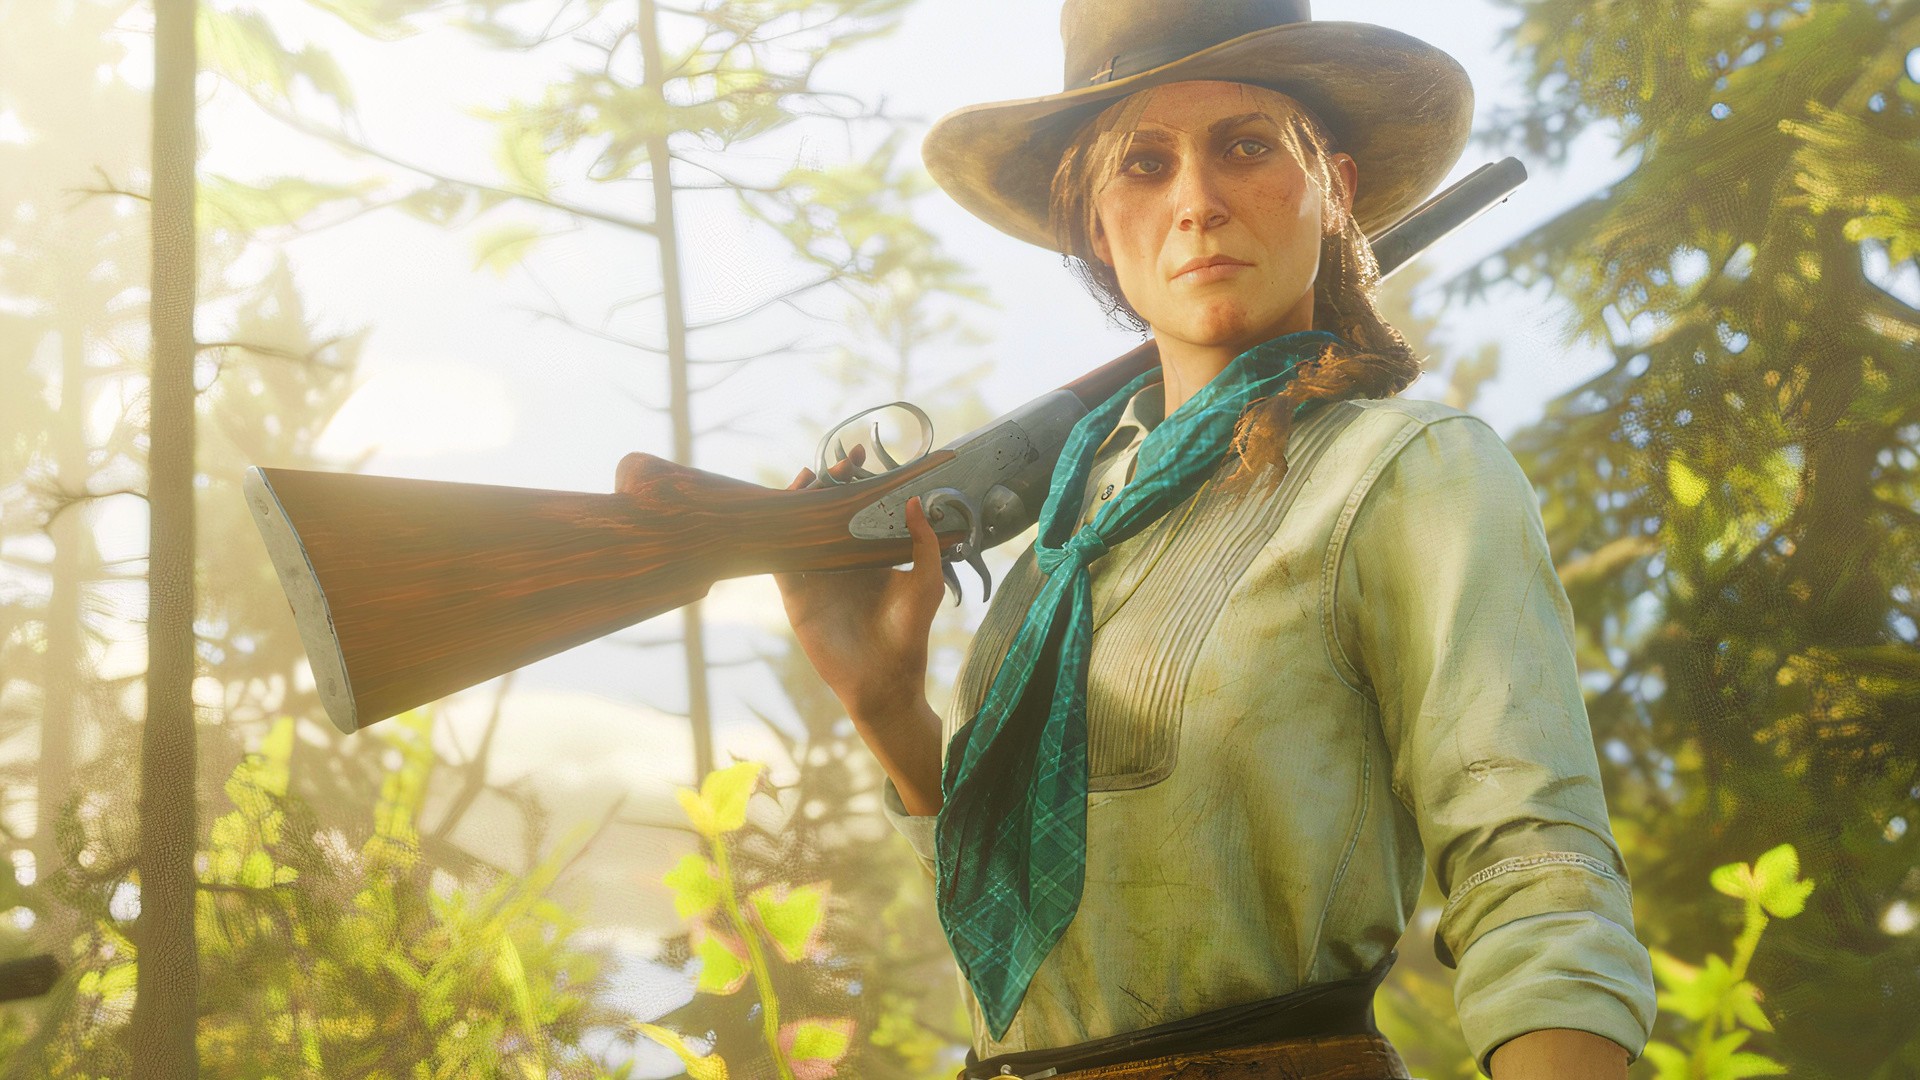 Red Dead Redemption 2 cut content hints at missions canned by Rockstar